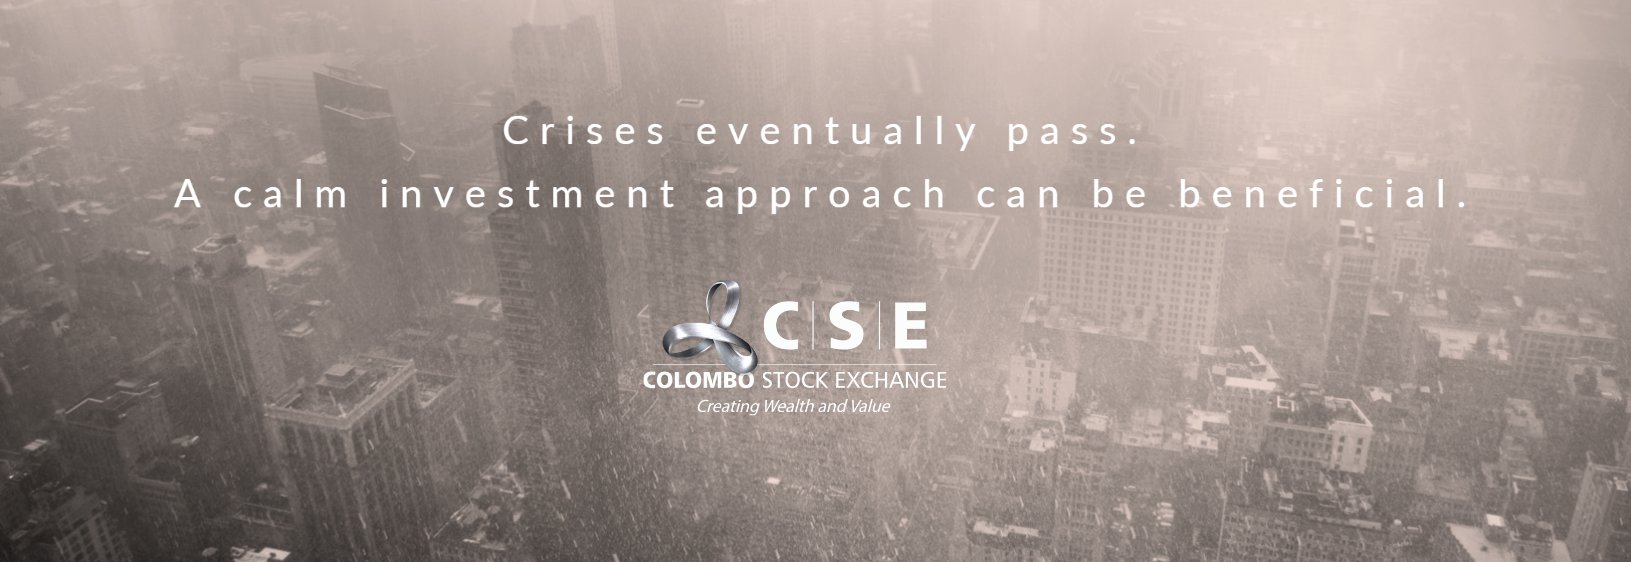 Trading at Colombo Stock Exchange halted